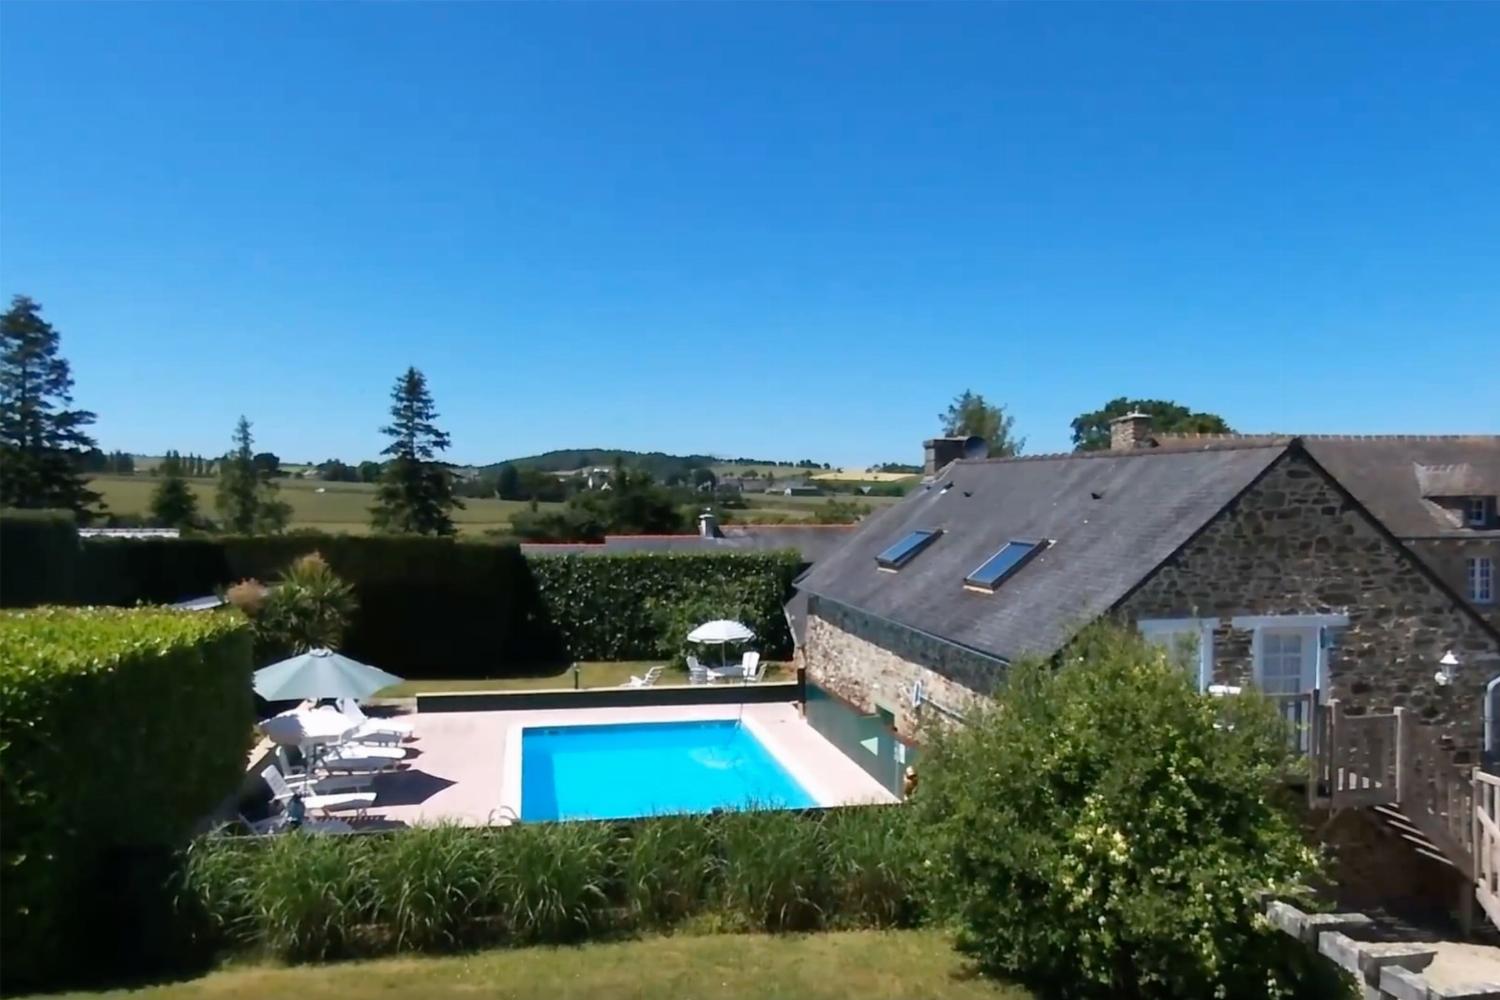 Rental cottage in Brittany with private heated pool